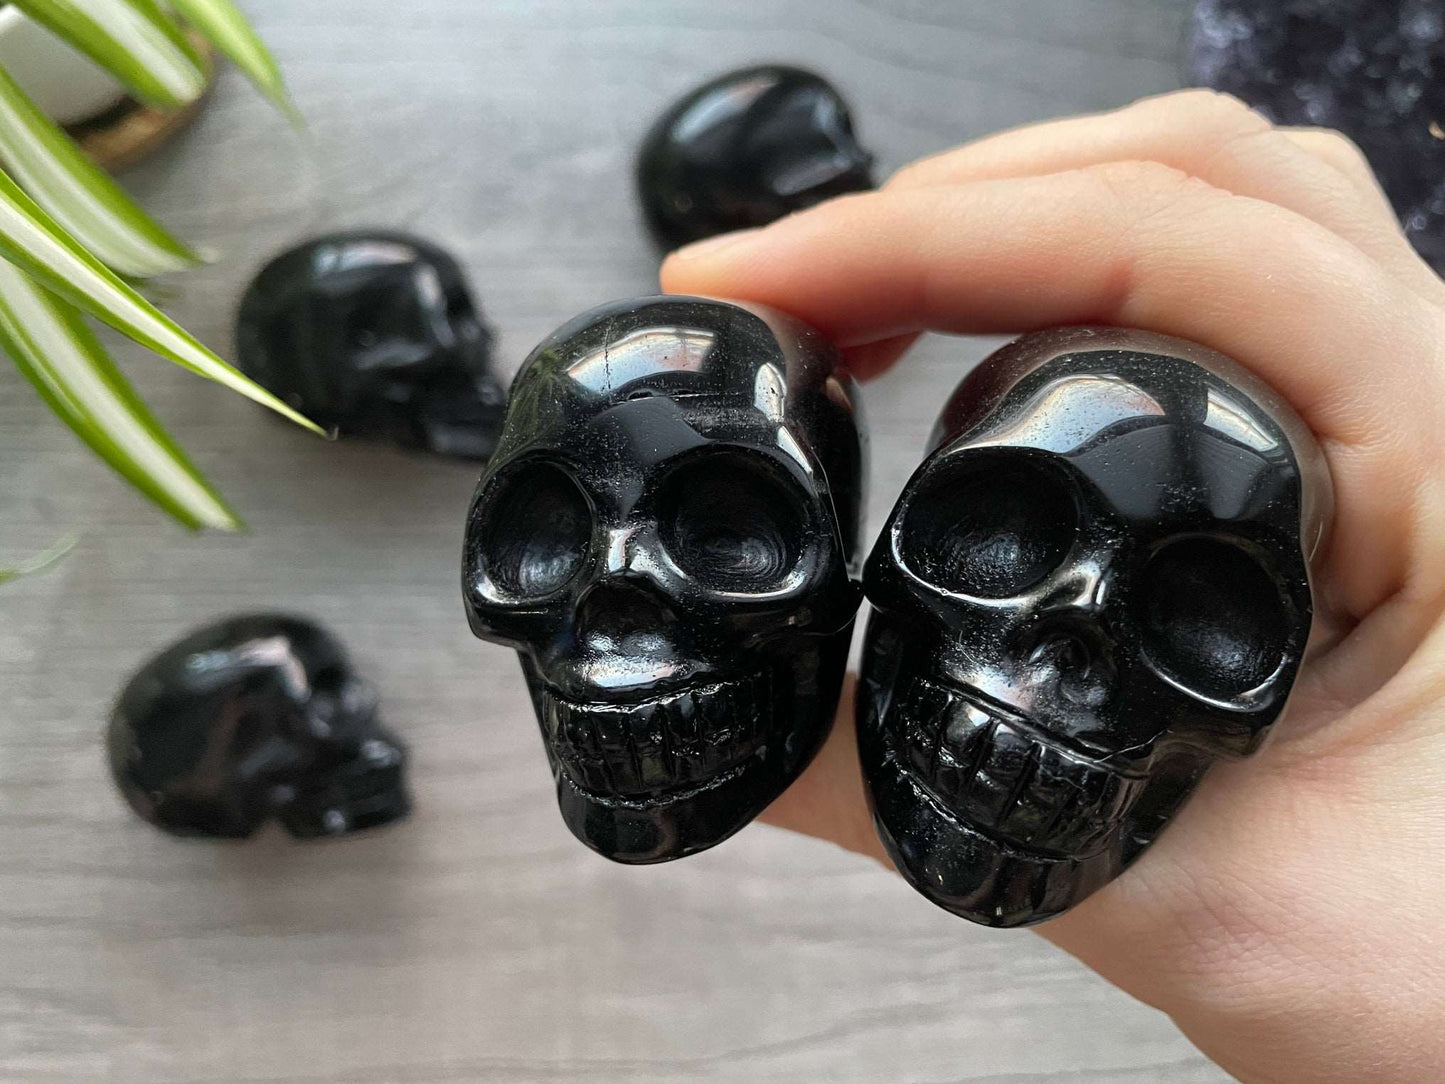 Pictured are various small skulls carved out of black obsidian.